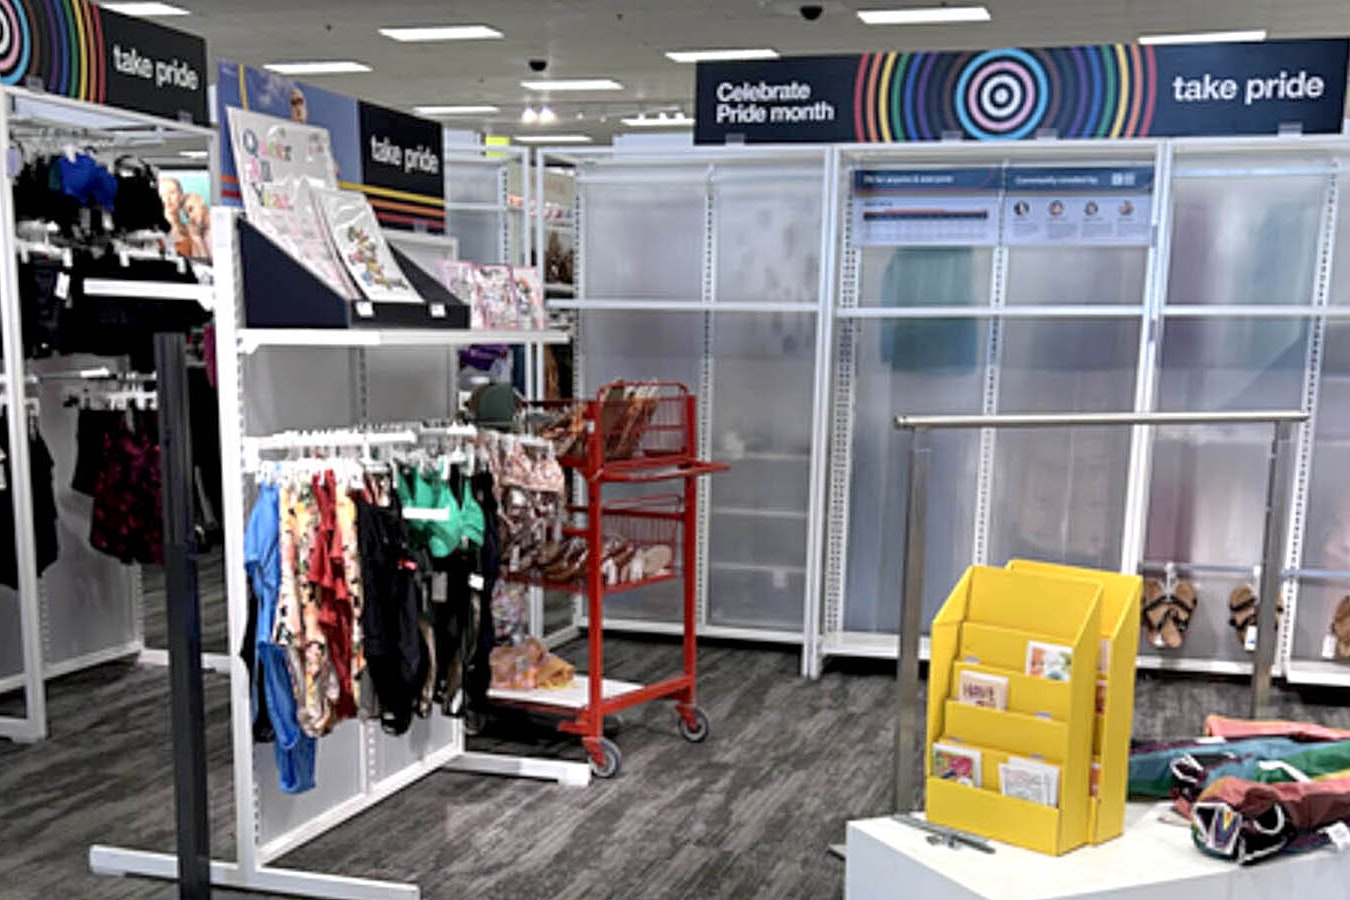 The Pride Collection display at the Casper Target store is bare Thursday as it moves some of the display's items to the back of the store in the wake of national protests over the collection.